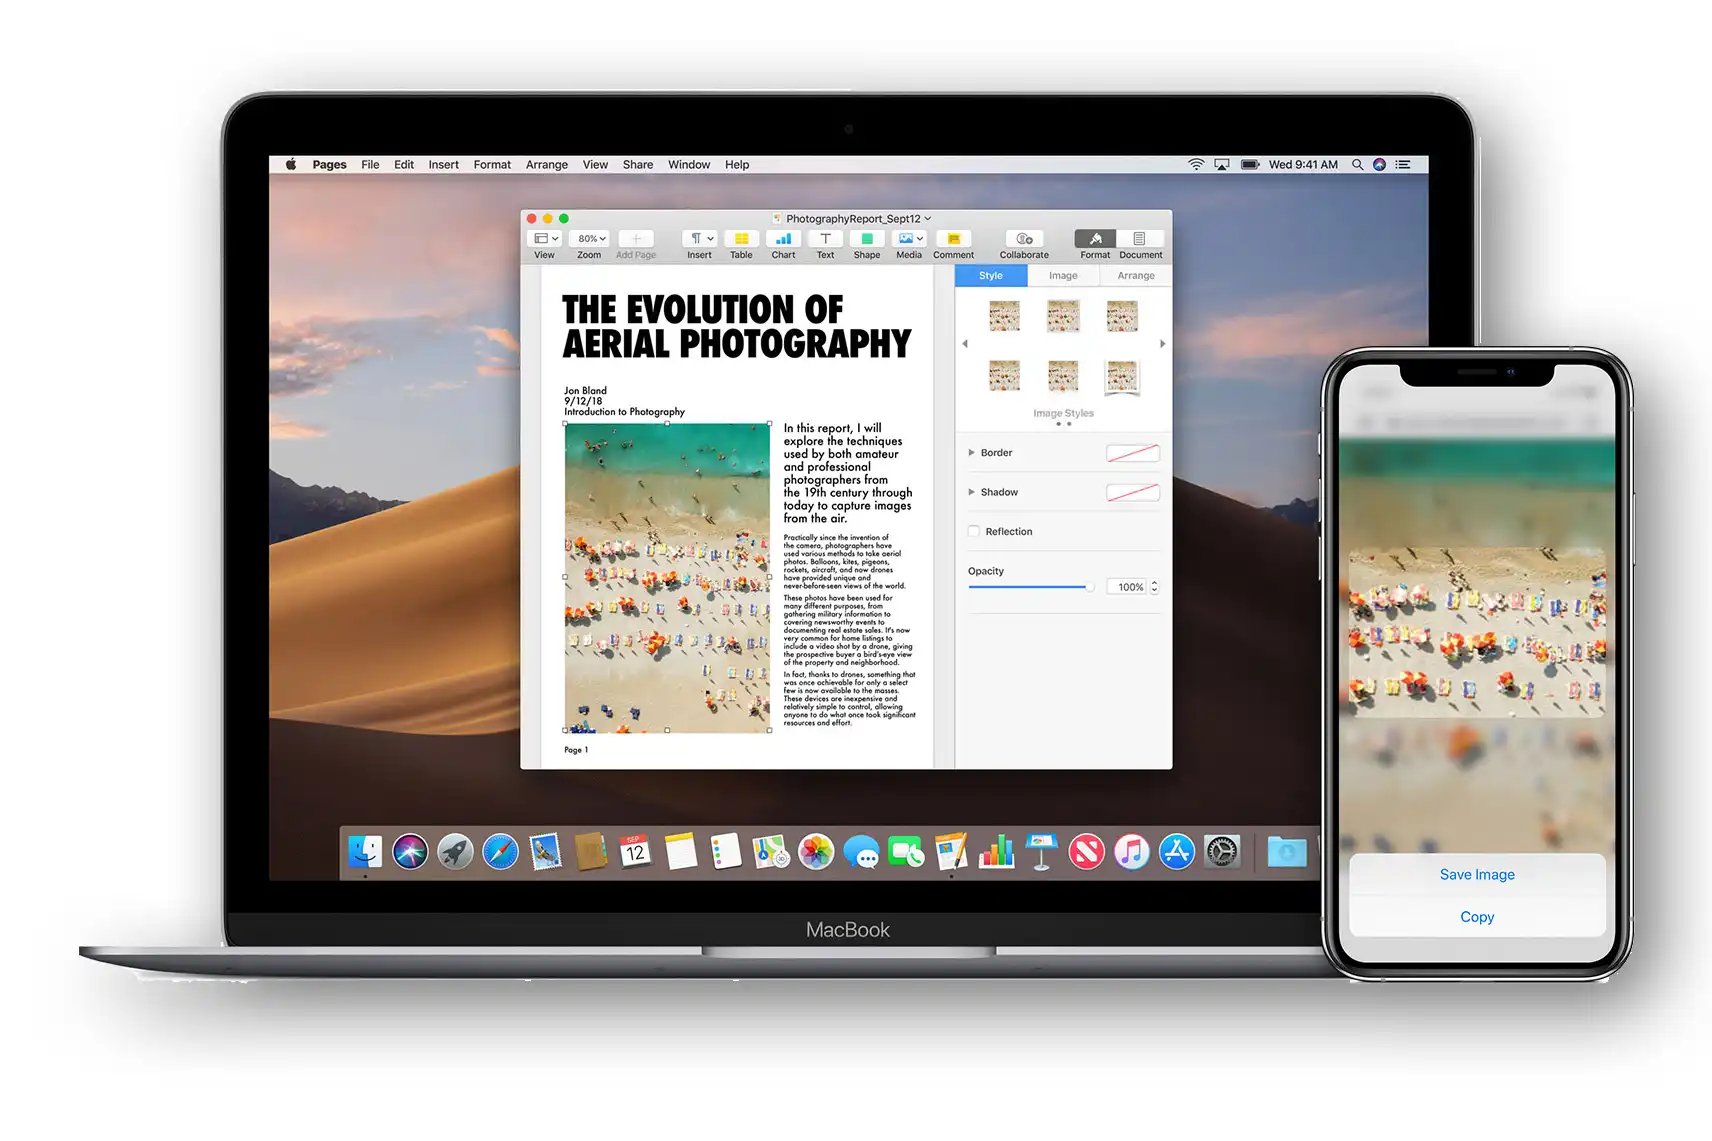 How To Import Photos From An IPhone To A Mac